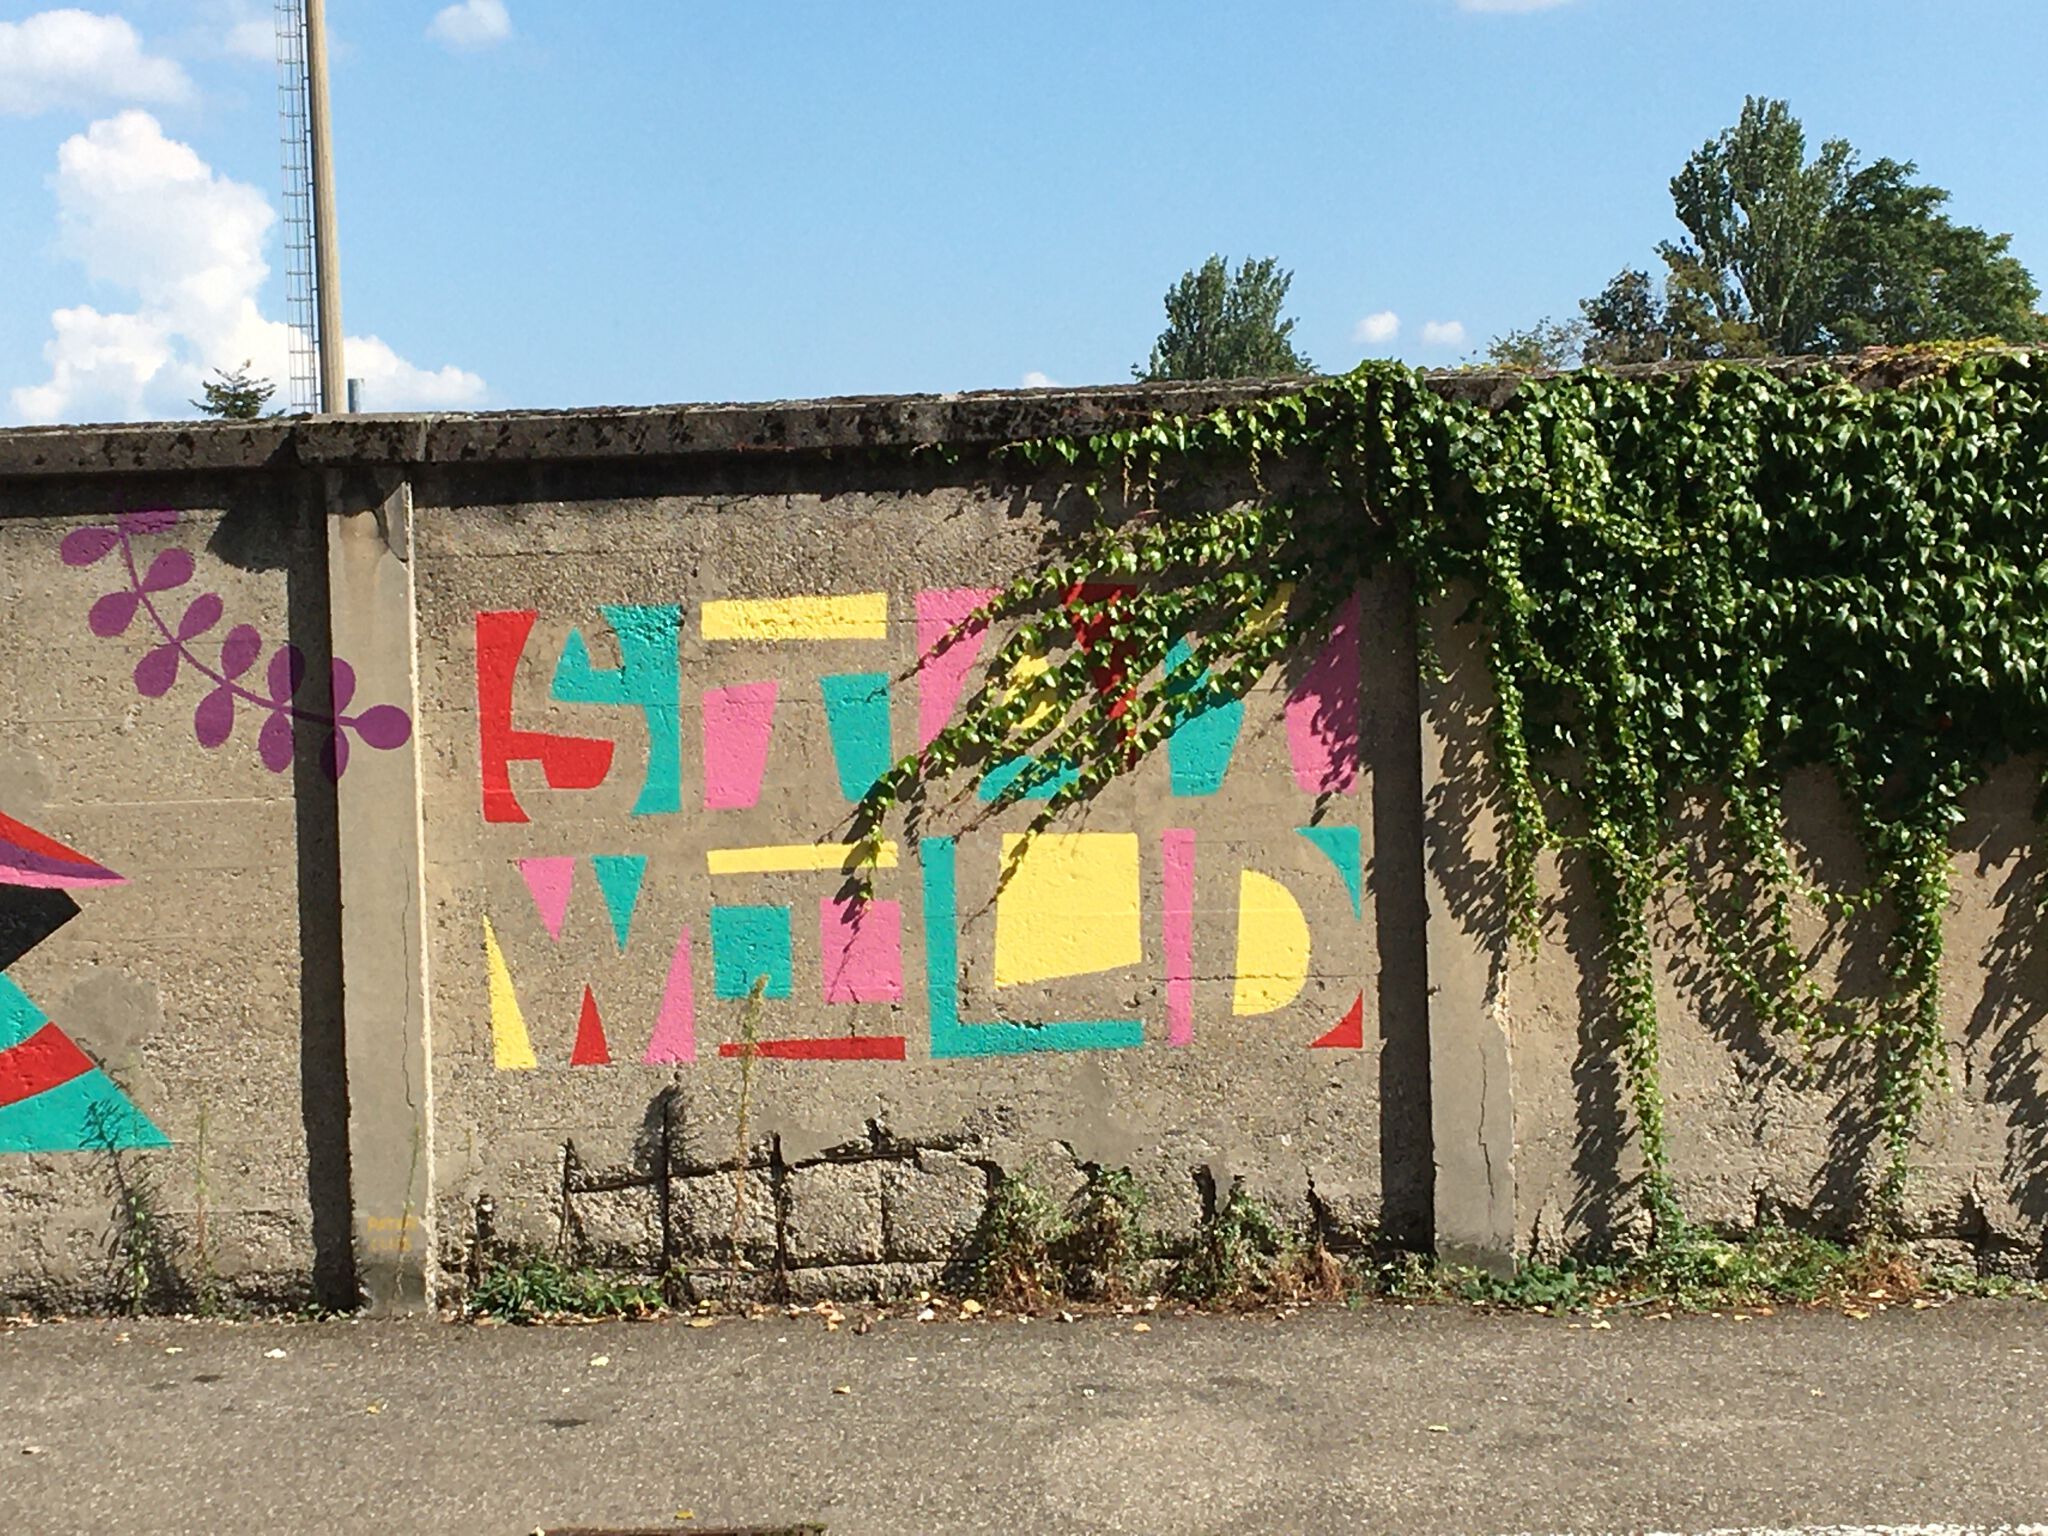 Camille Epplin, Elodieflvt, Francis Chouquet, May Limou&mdash;Stay Wild